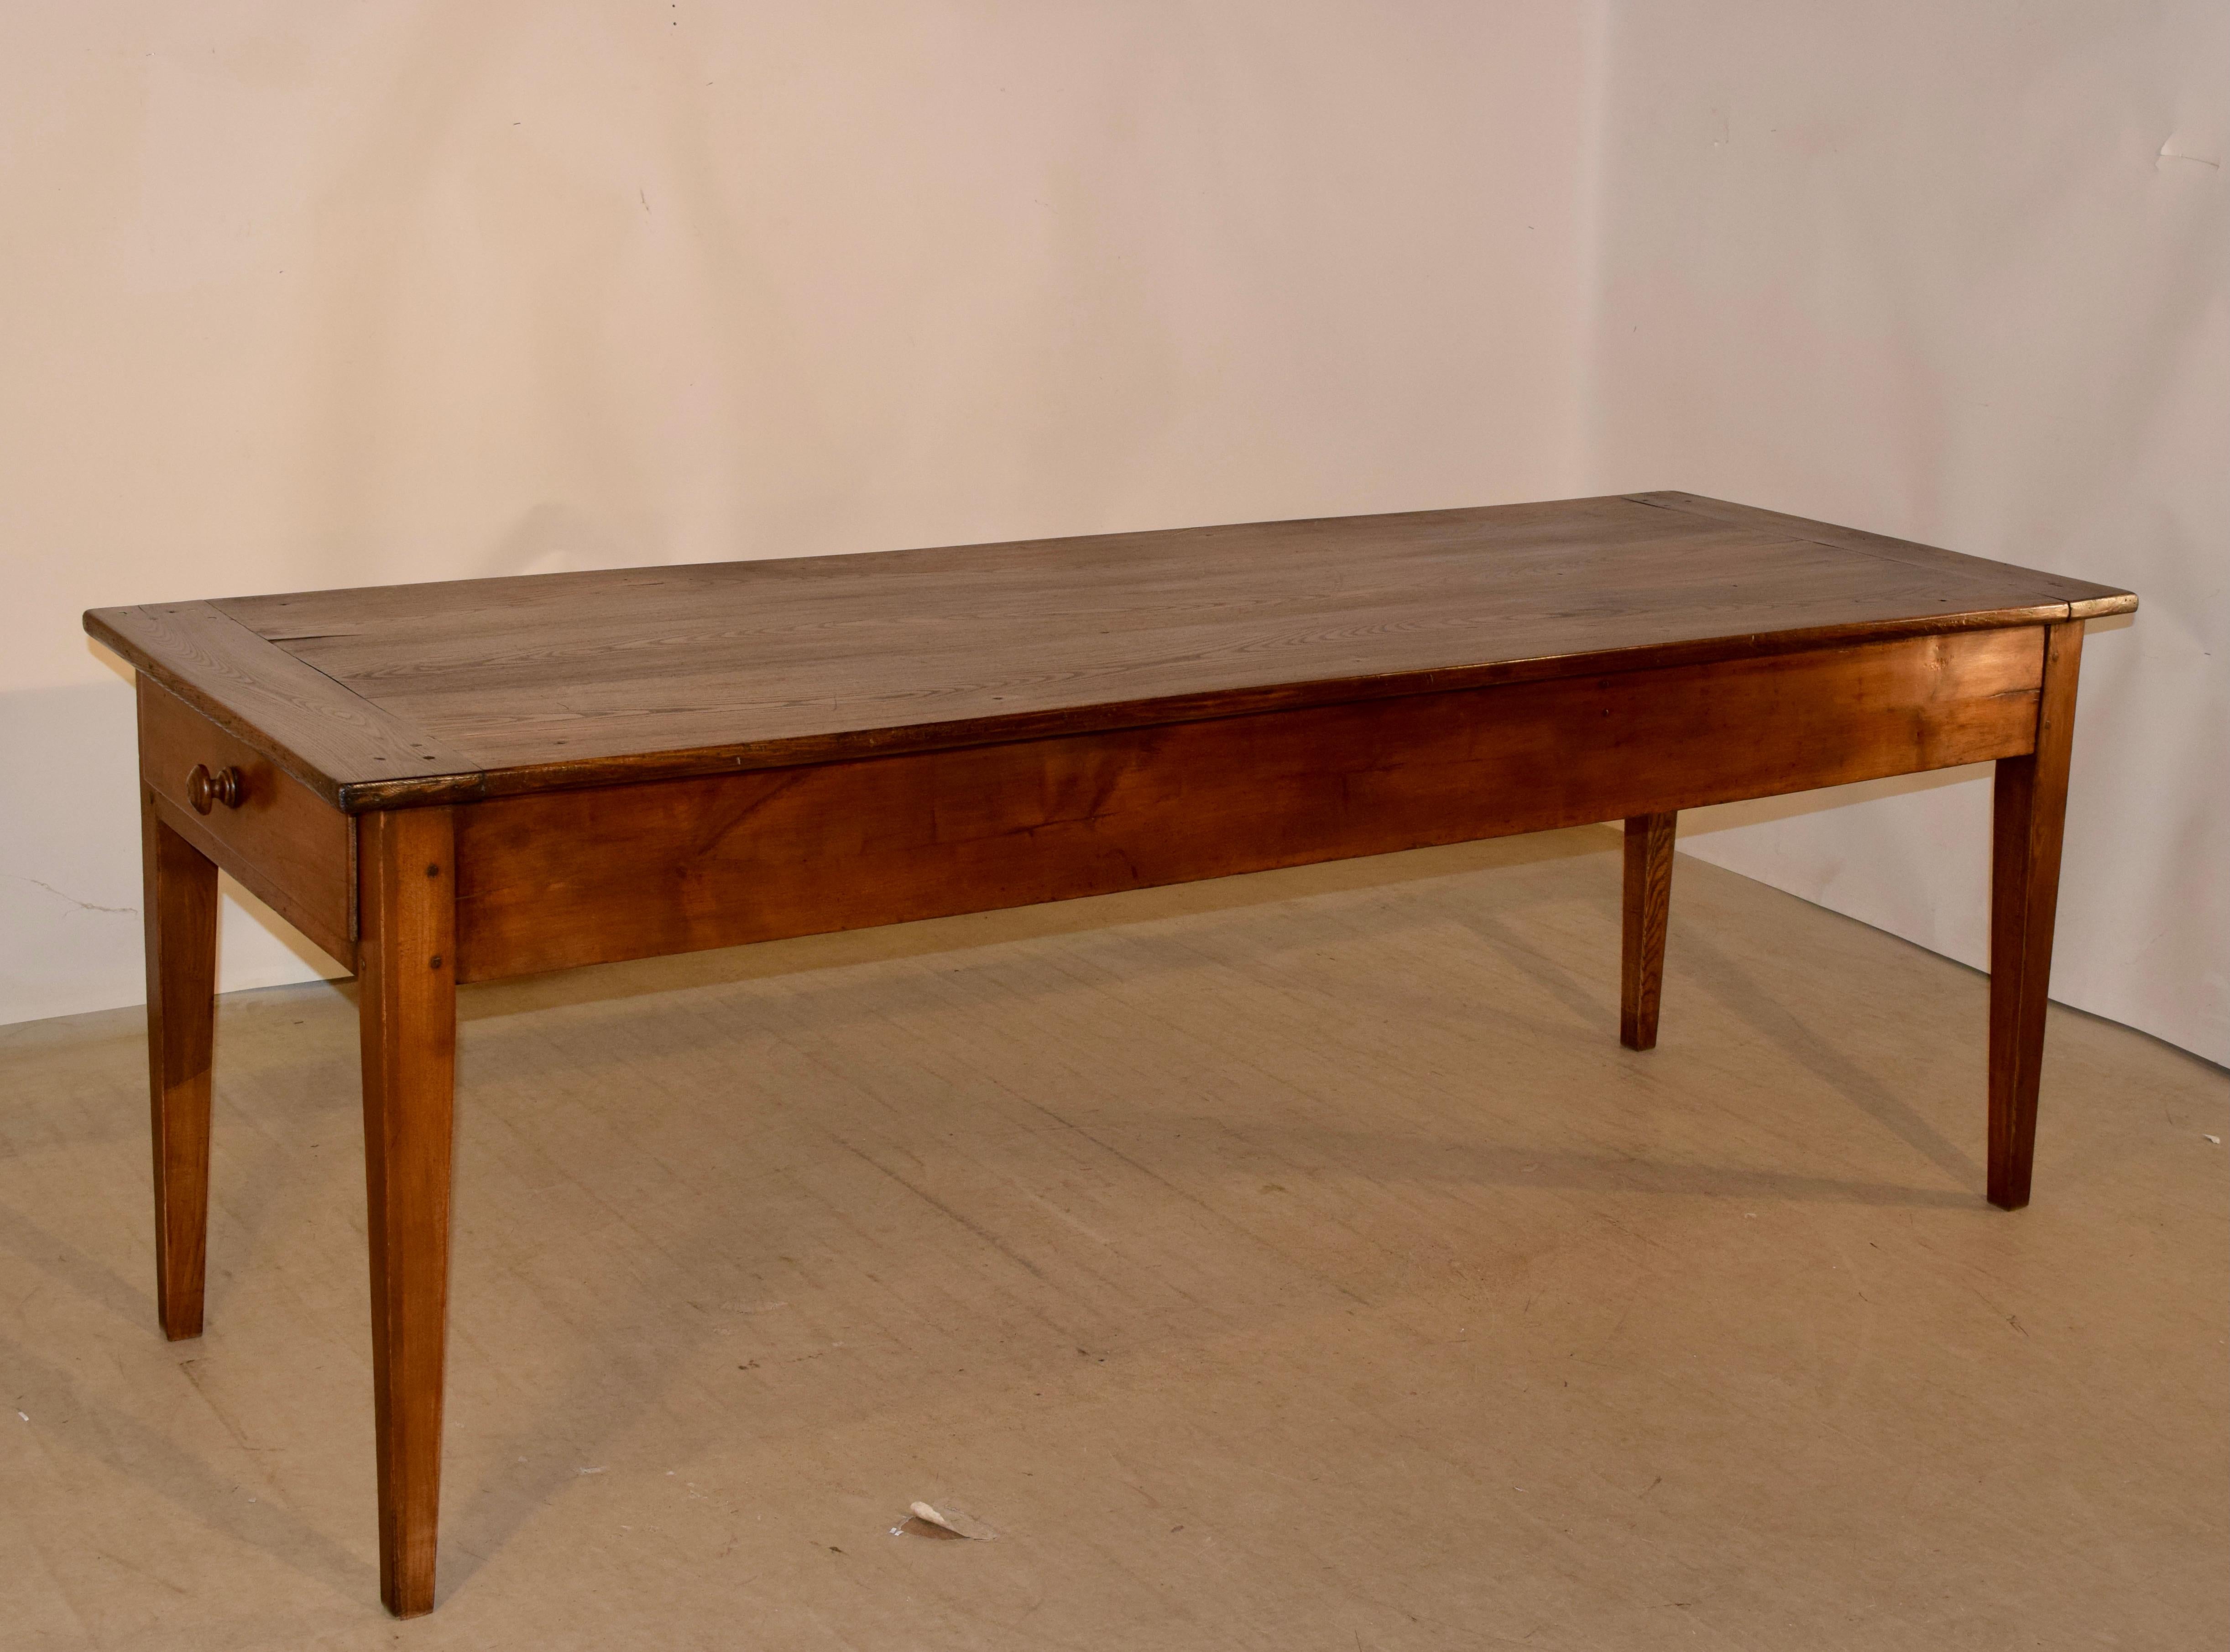 18th century chestnut farm table from France with a three board top which has banded ends, following down to a simple apron, measuring 24 inches in height. The apron contains three drawers, one on each end and a smaller one in the front of the